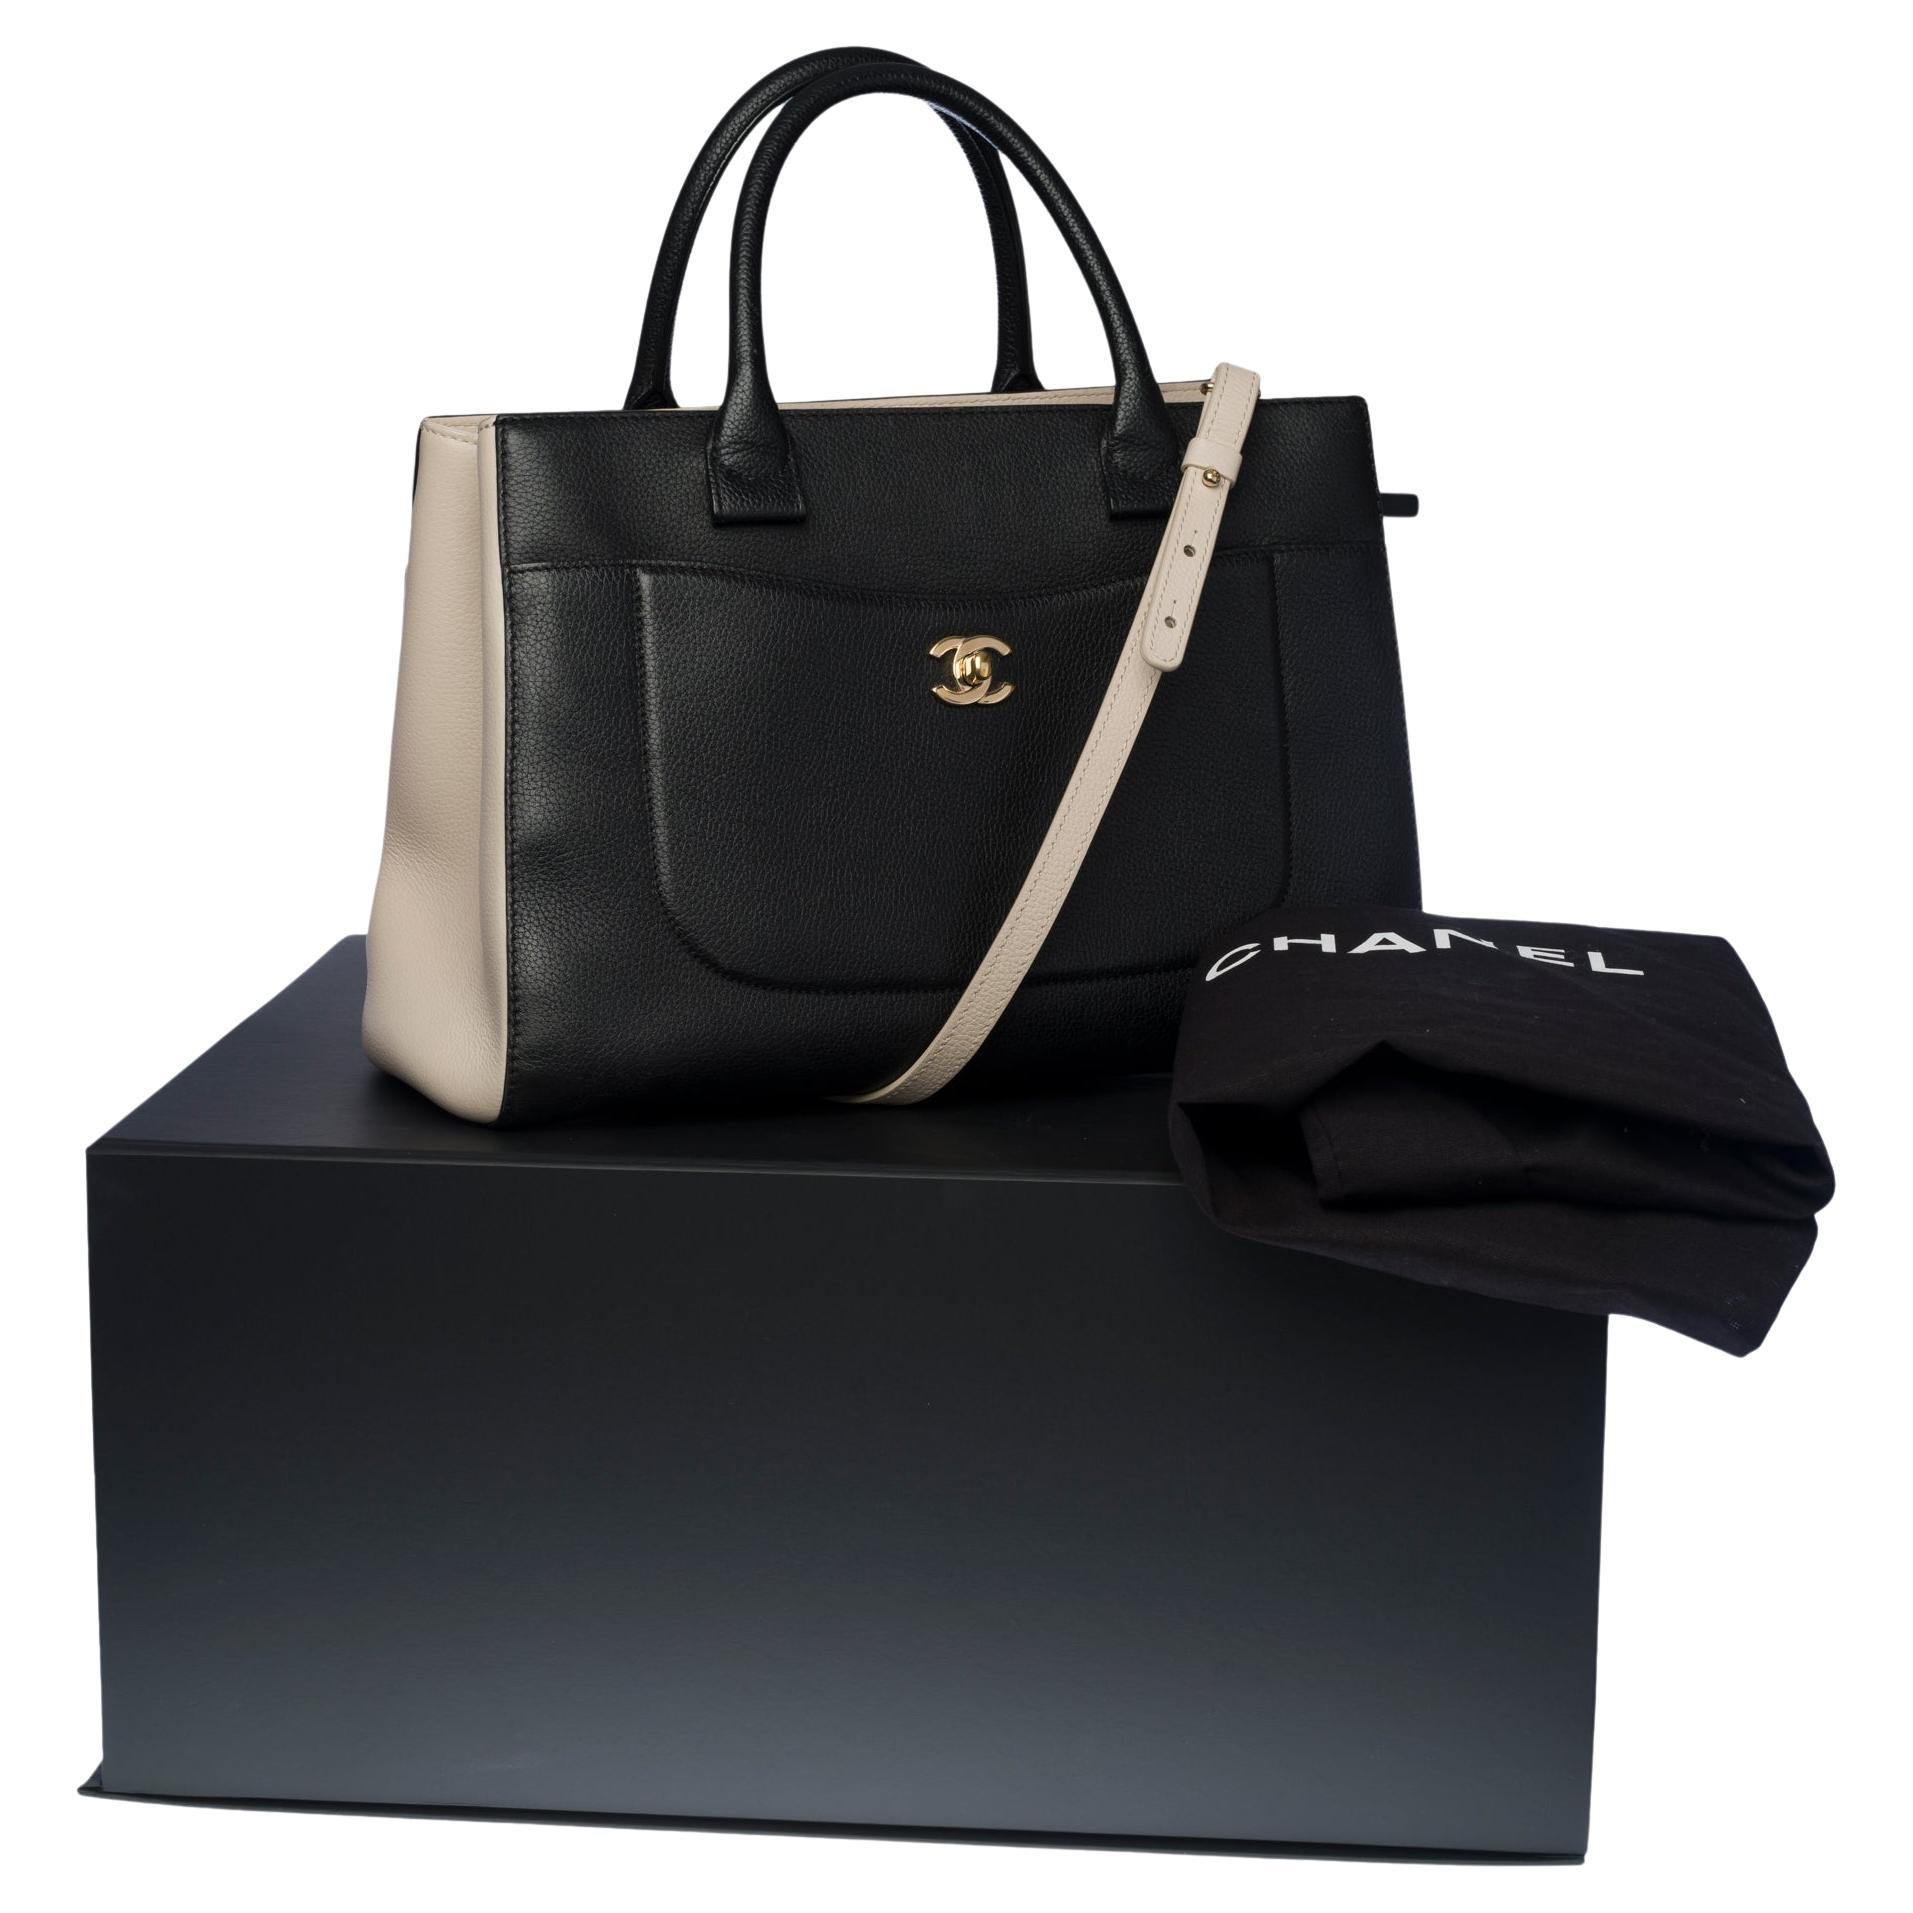 Chanel Neo Executive Tote bag strap in black and beige grained